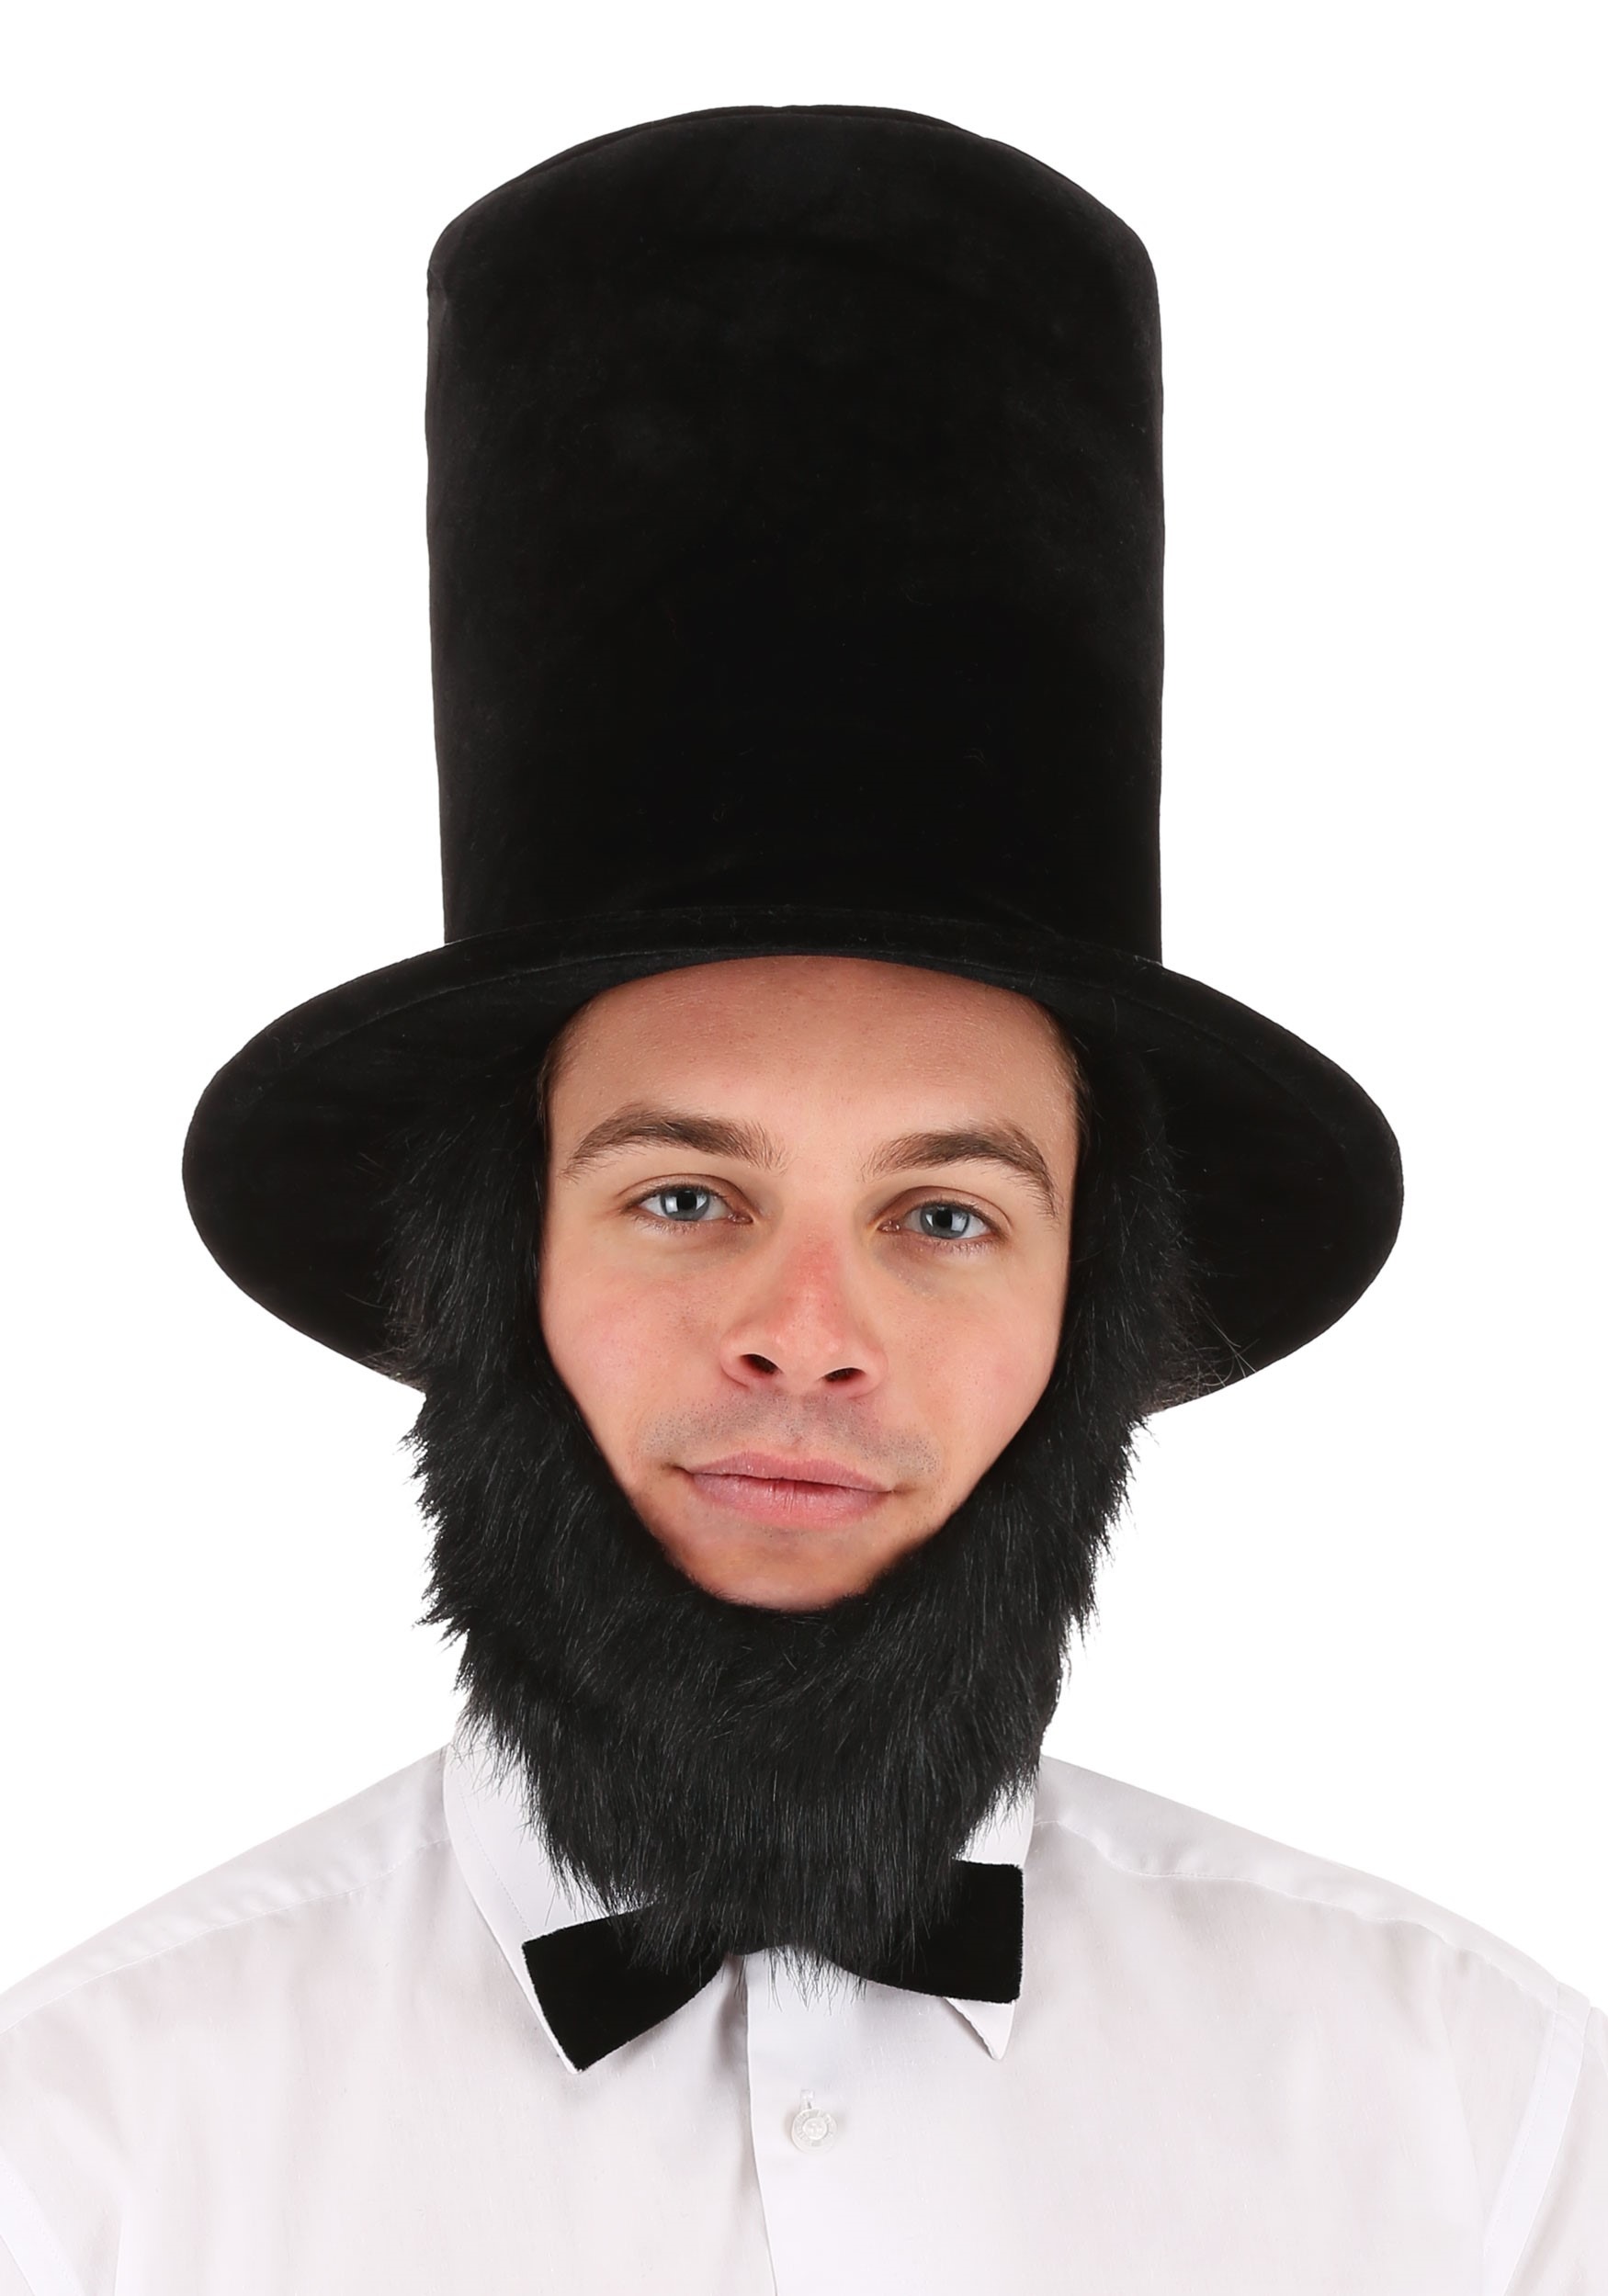 Abe Lincoln Costume Accessory Kit for Adults | Historical Accessories